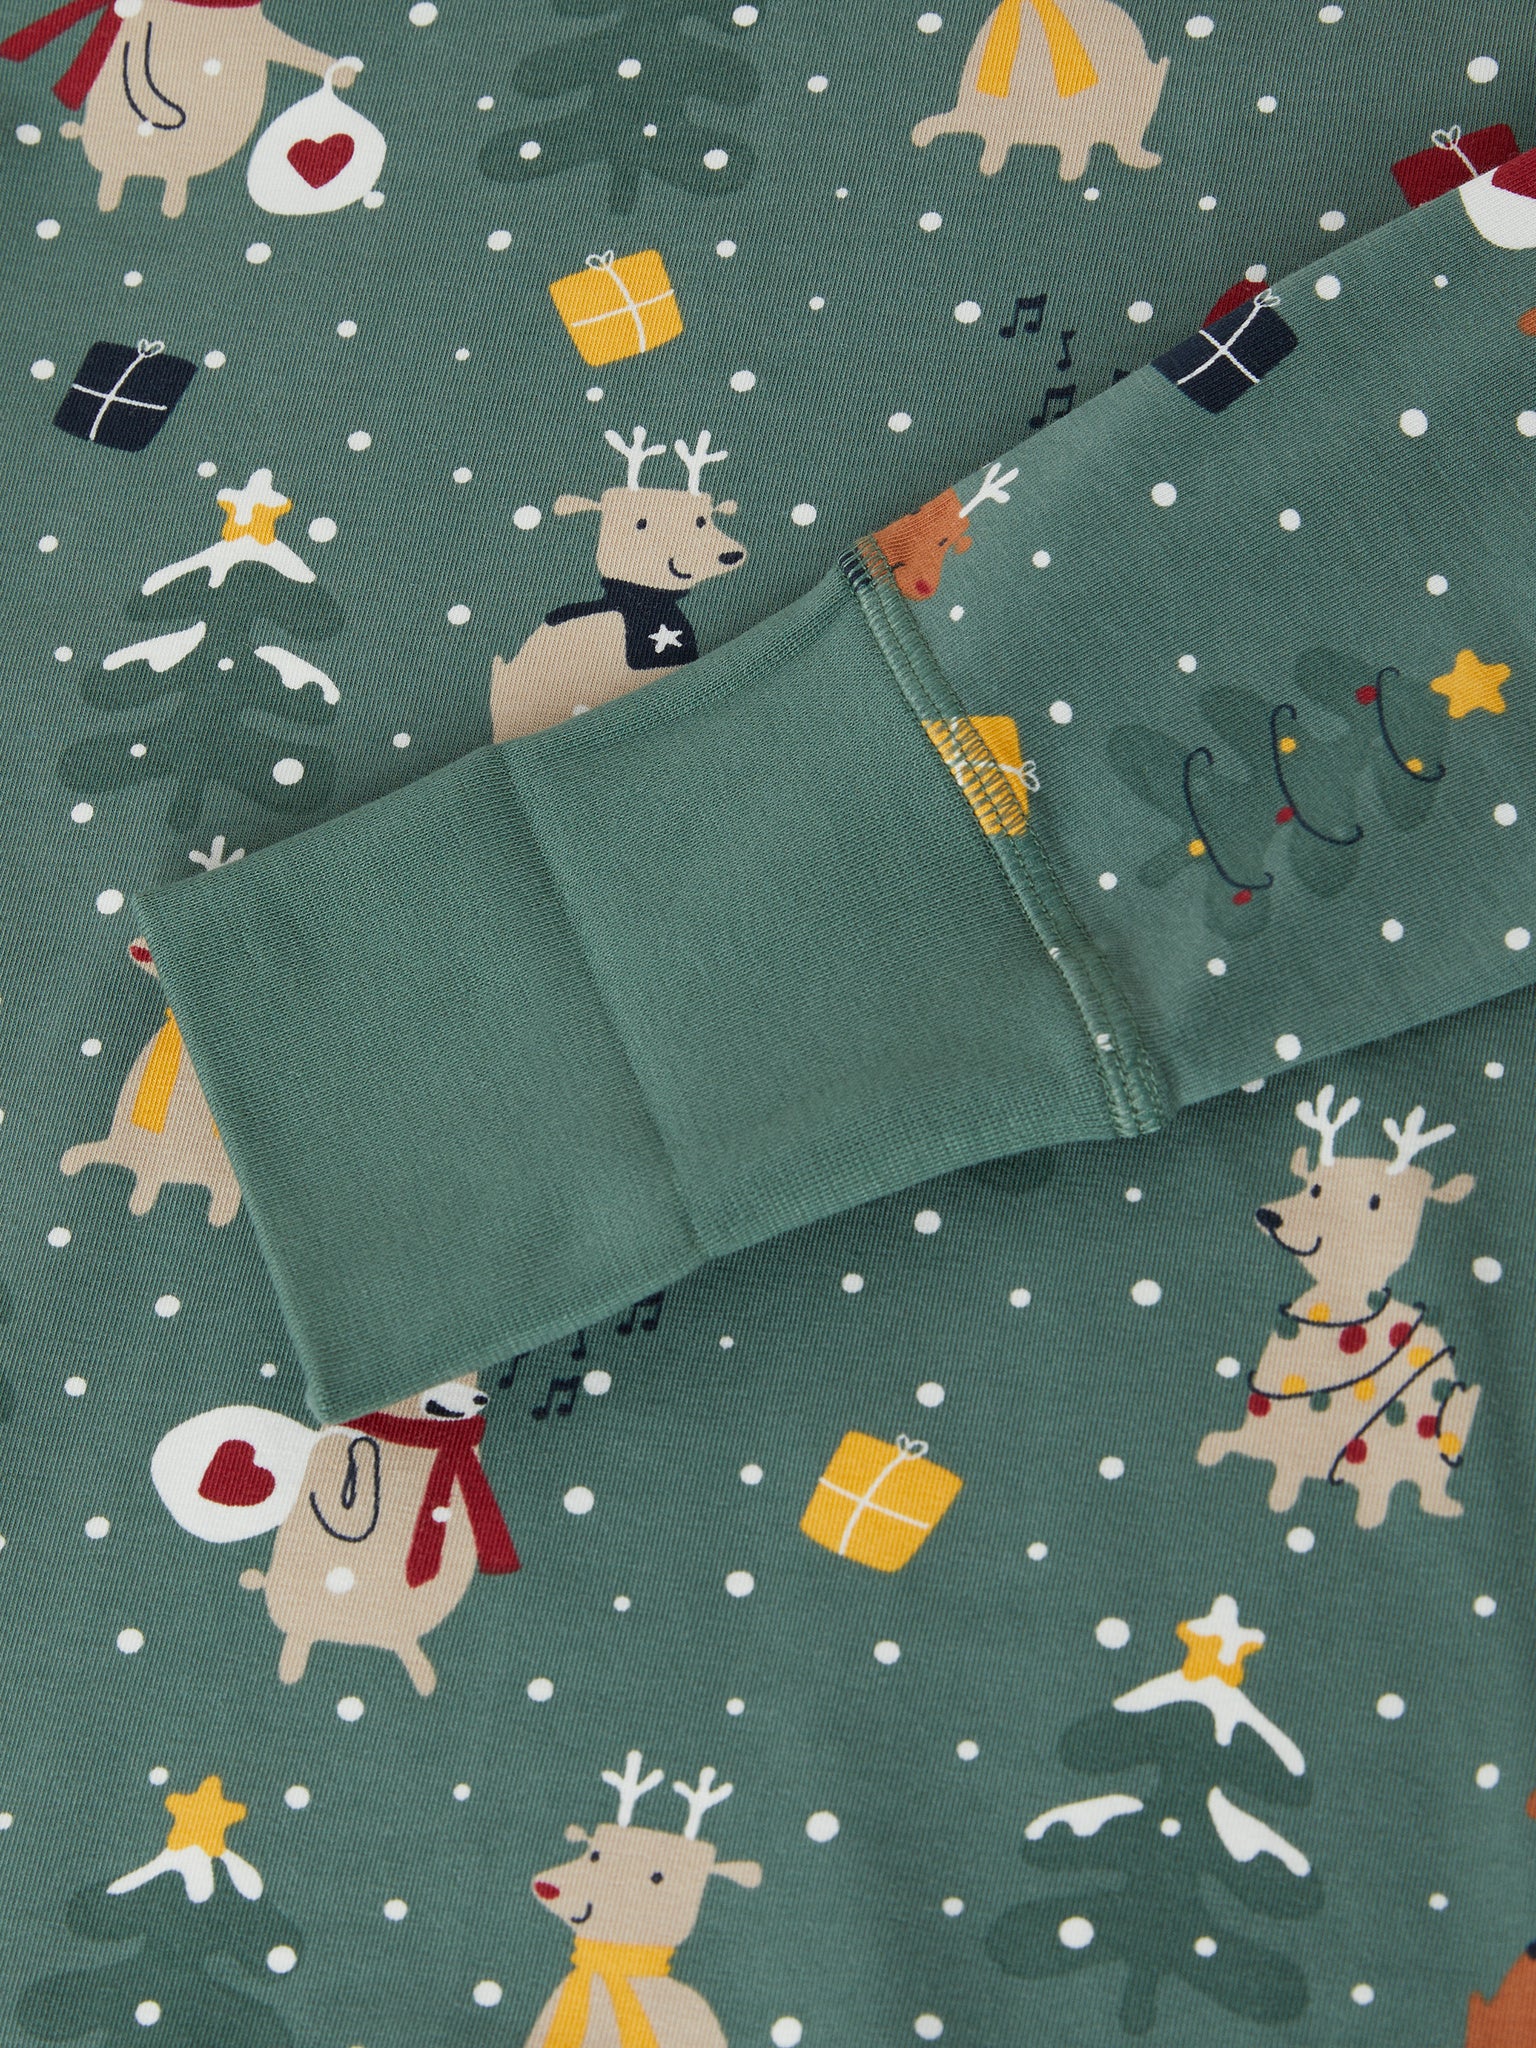 Green Organic Kids Christmas Pyjamas from the Polarn O. Pyret kidswear collection. The best ethical kids clothes